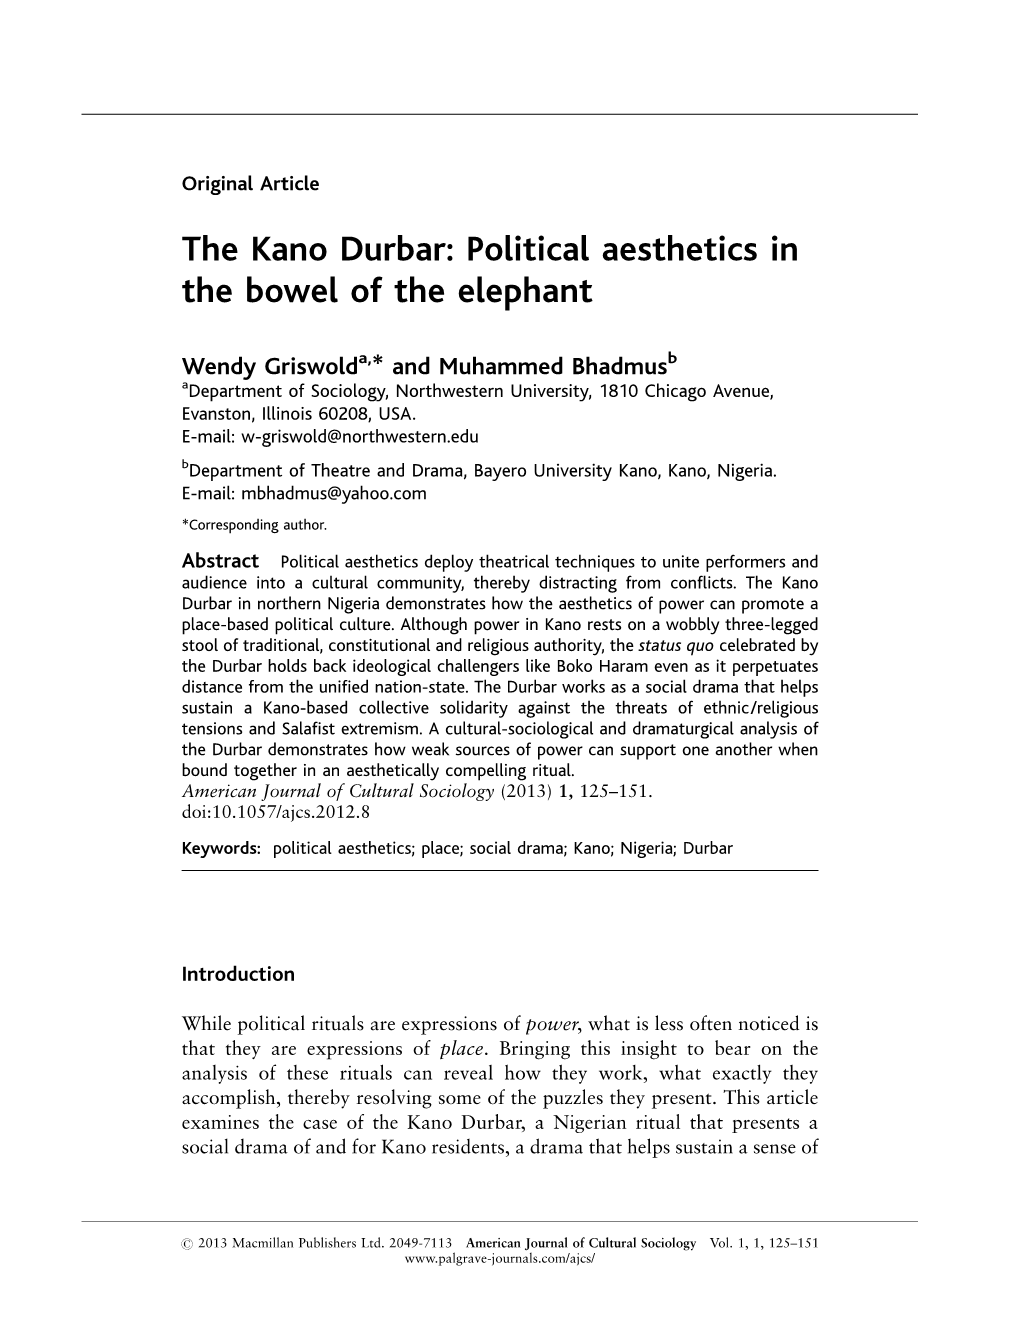 The Kano Durbar: Political Aesthetics in the Bowel of the Elephant